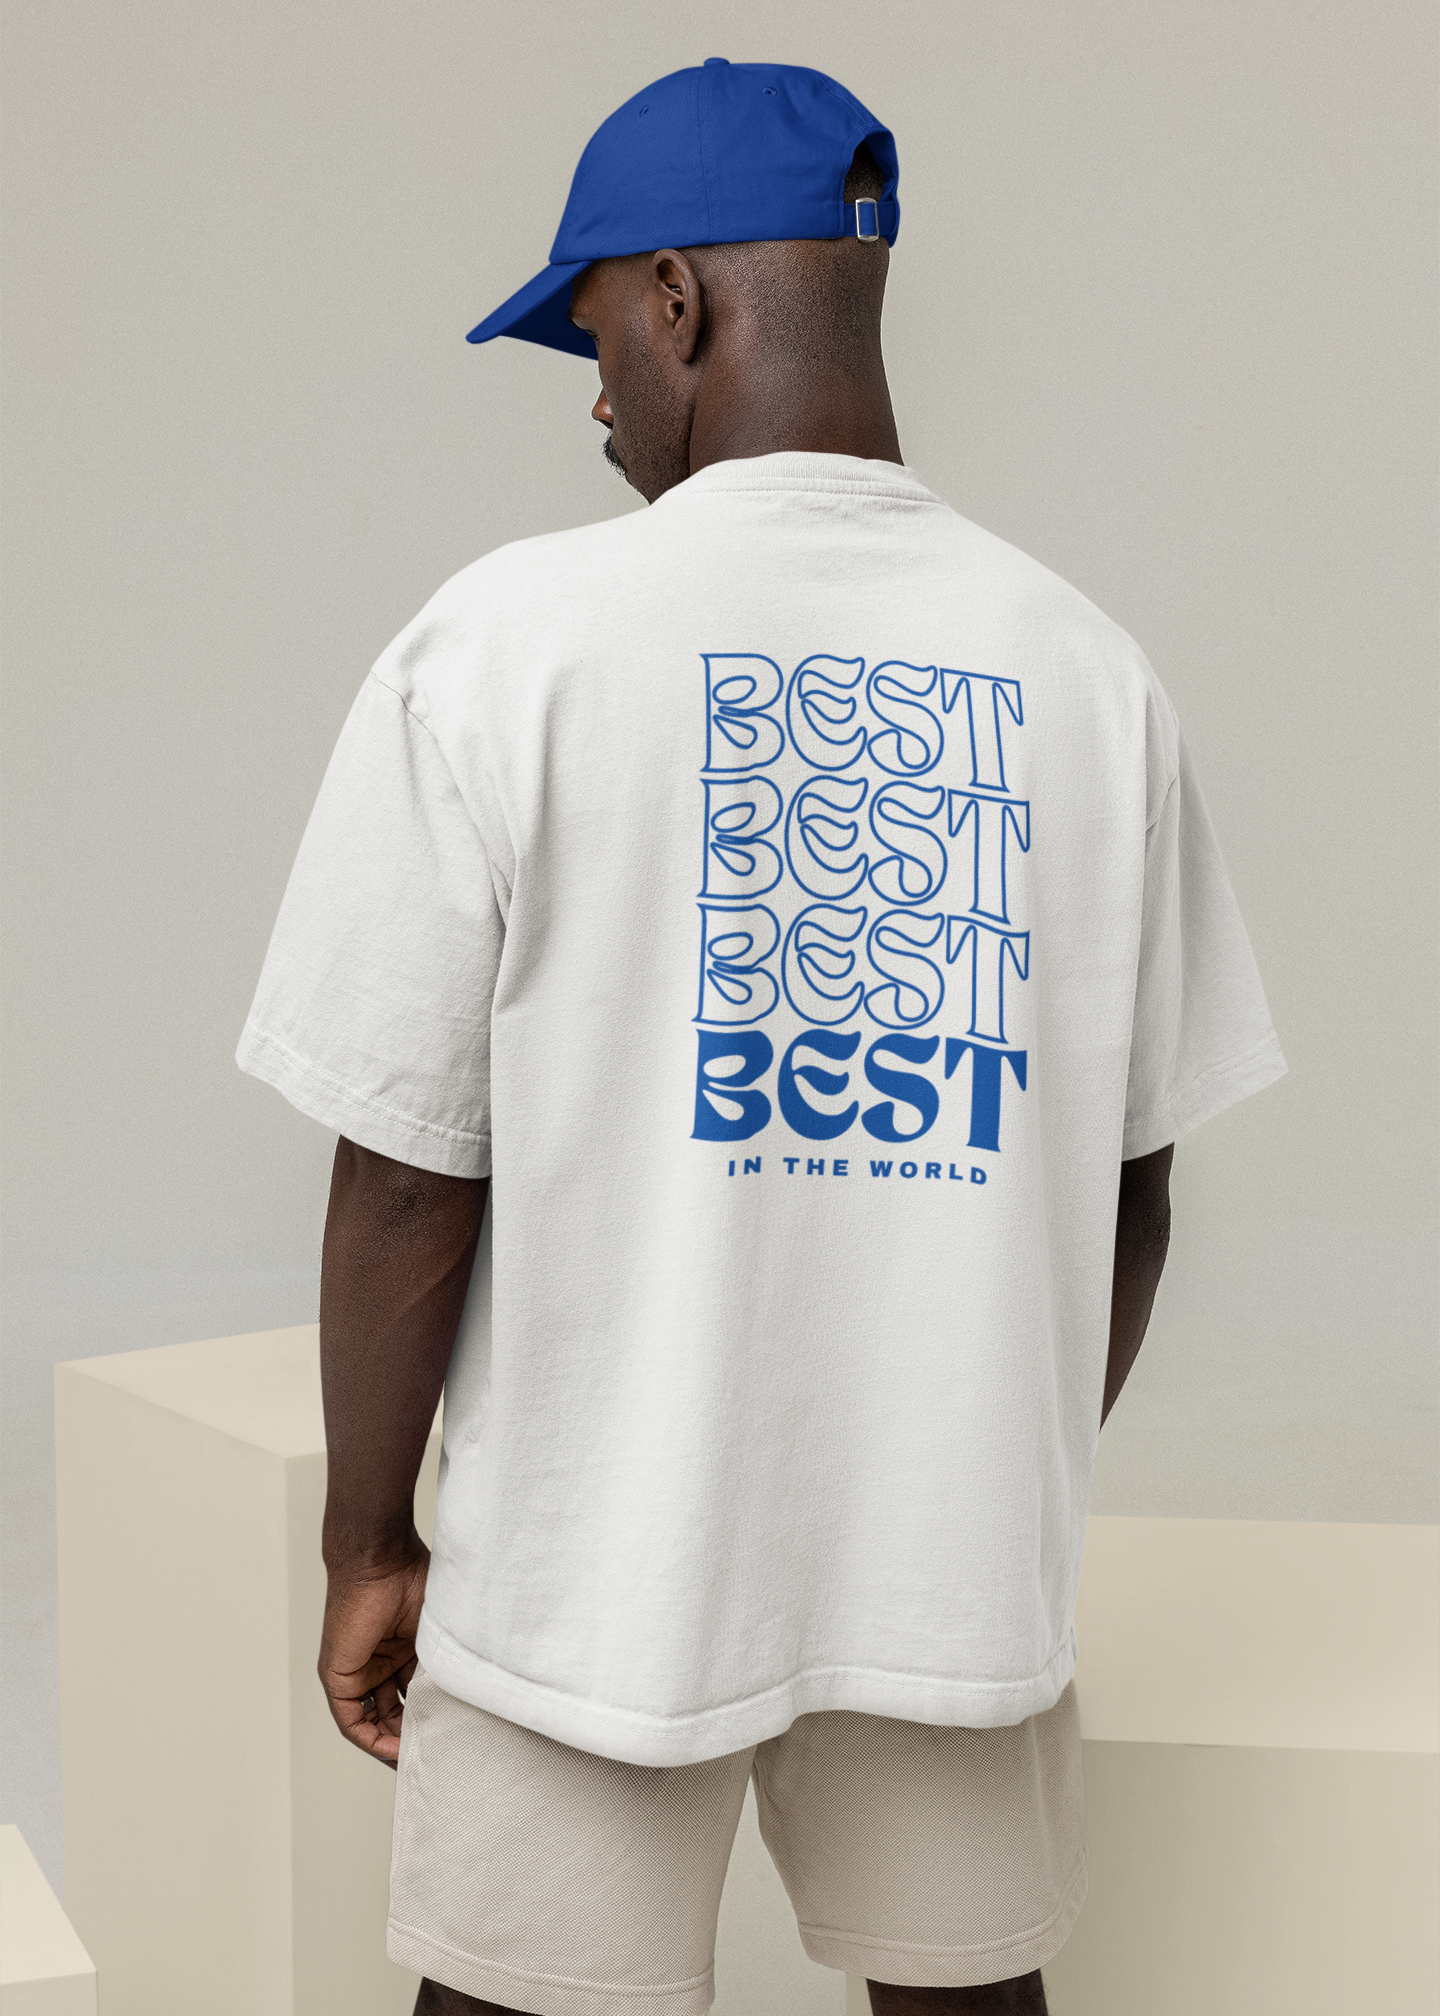 back-view-mockup-of-a-man-wearing-an-oversized-tee-m26648.png